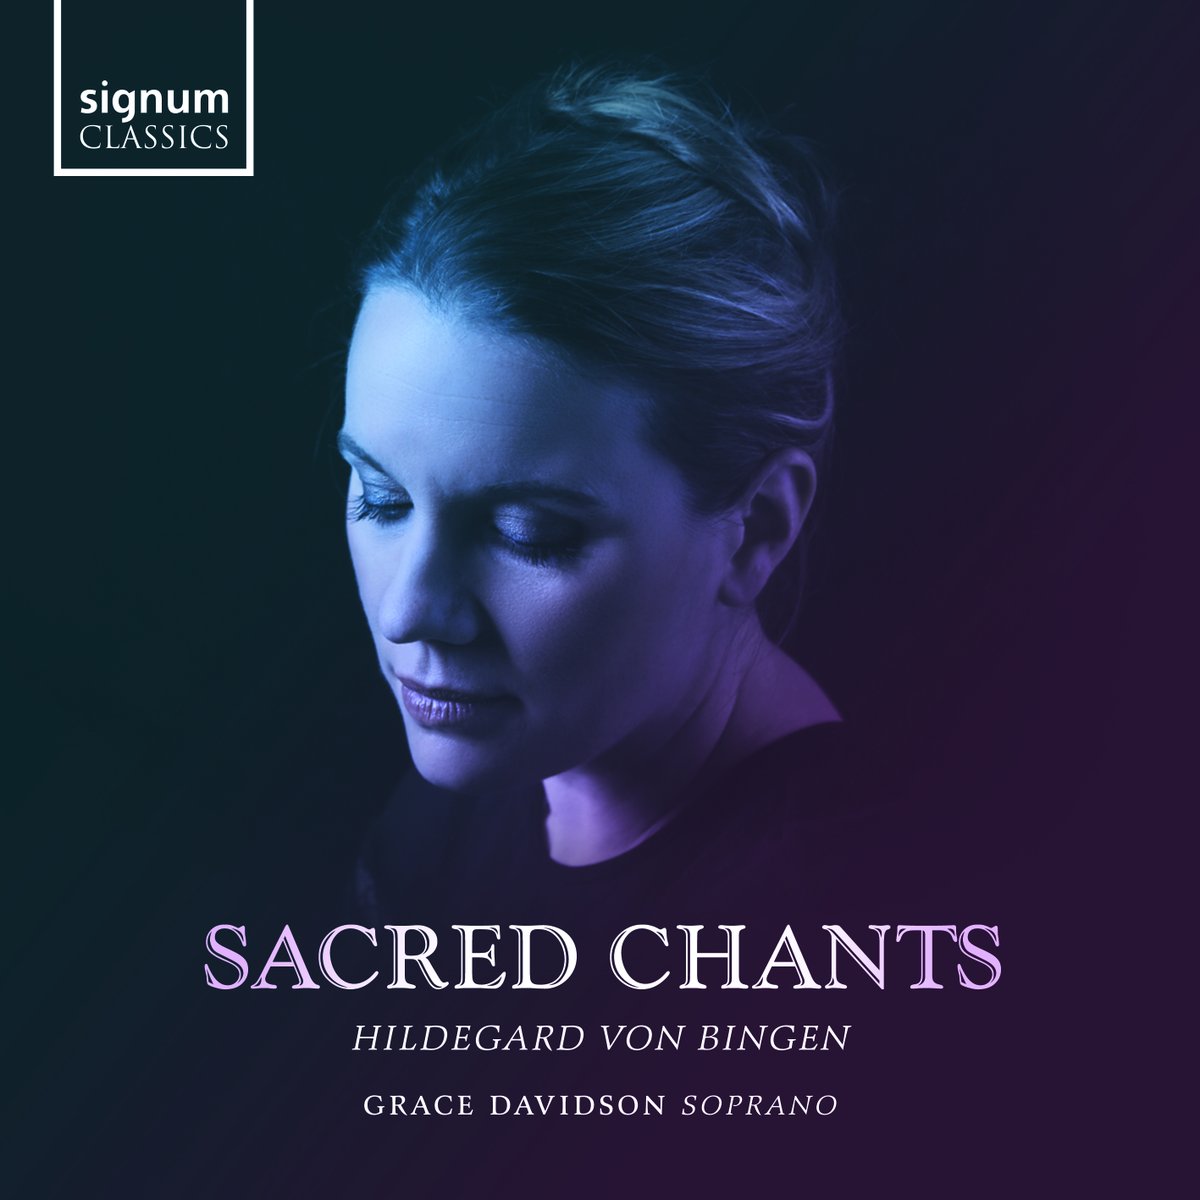 💿NEW RELEASE💿 Today @SignumRecords release @GraceLSDavidson's album, Sacred Chants, celebrating the music of Hildegard of Bingen🎵 Hear its ethereal sound channeled through Grace's arresting voice, below👇 lnk.to/SacredChants